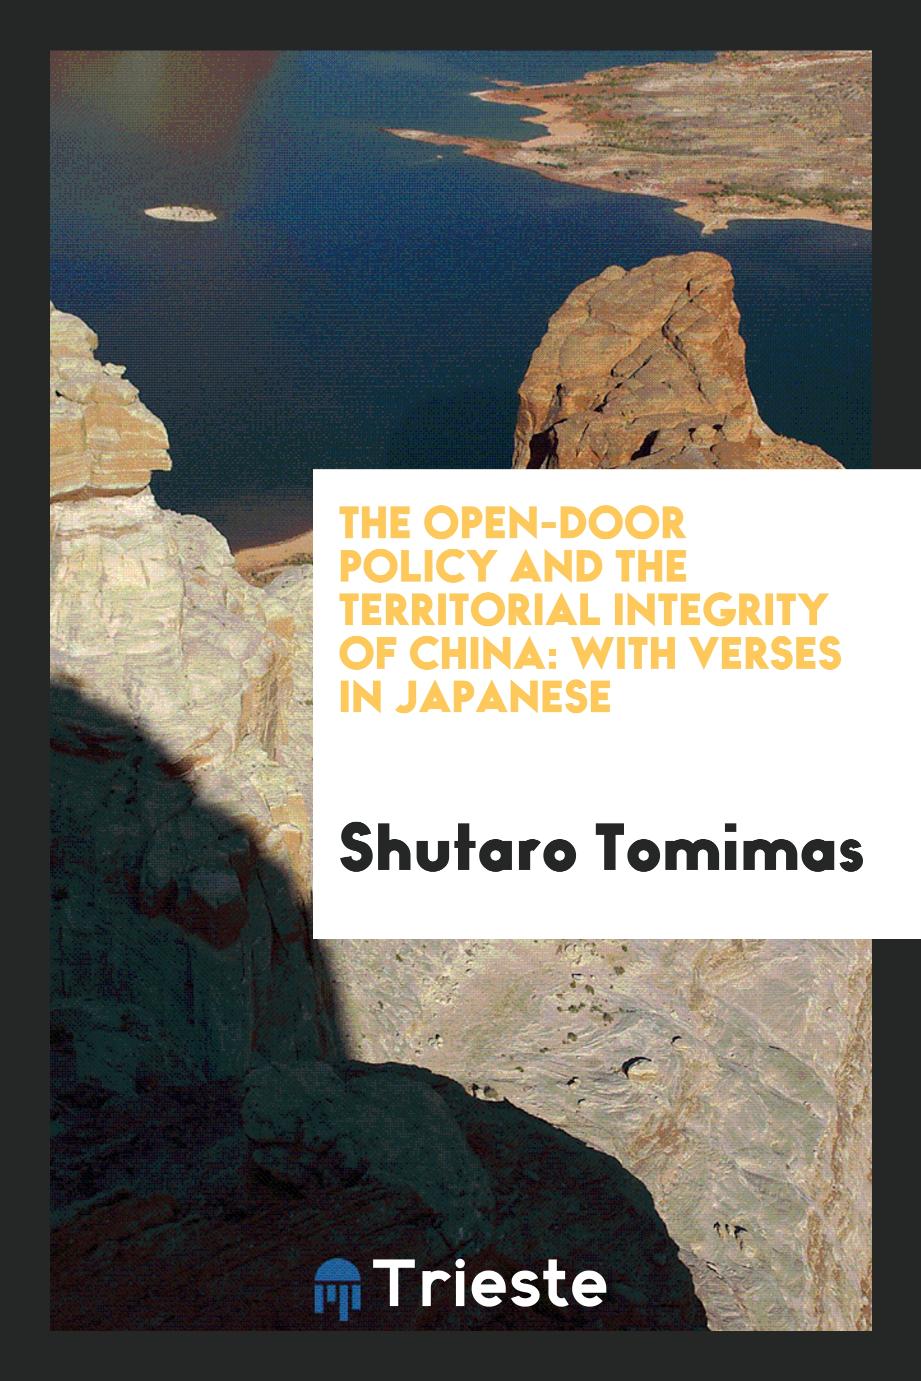 The Open-Door Policy and the Territorial Integrity of China: With Verses in Japanese